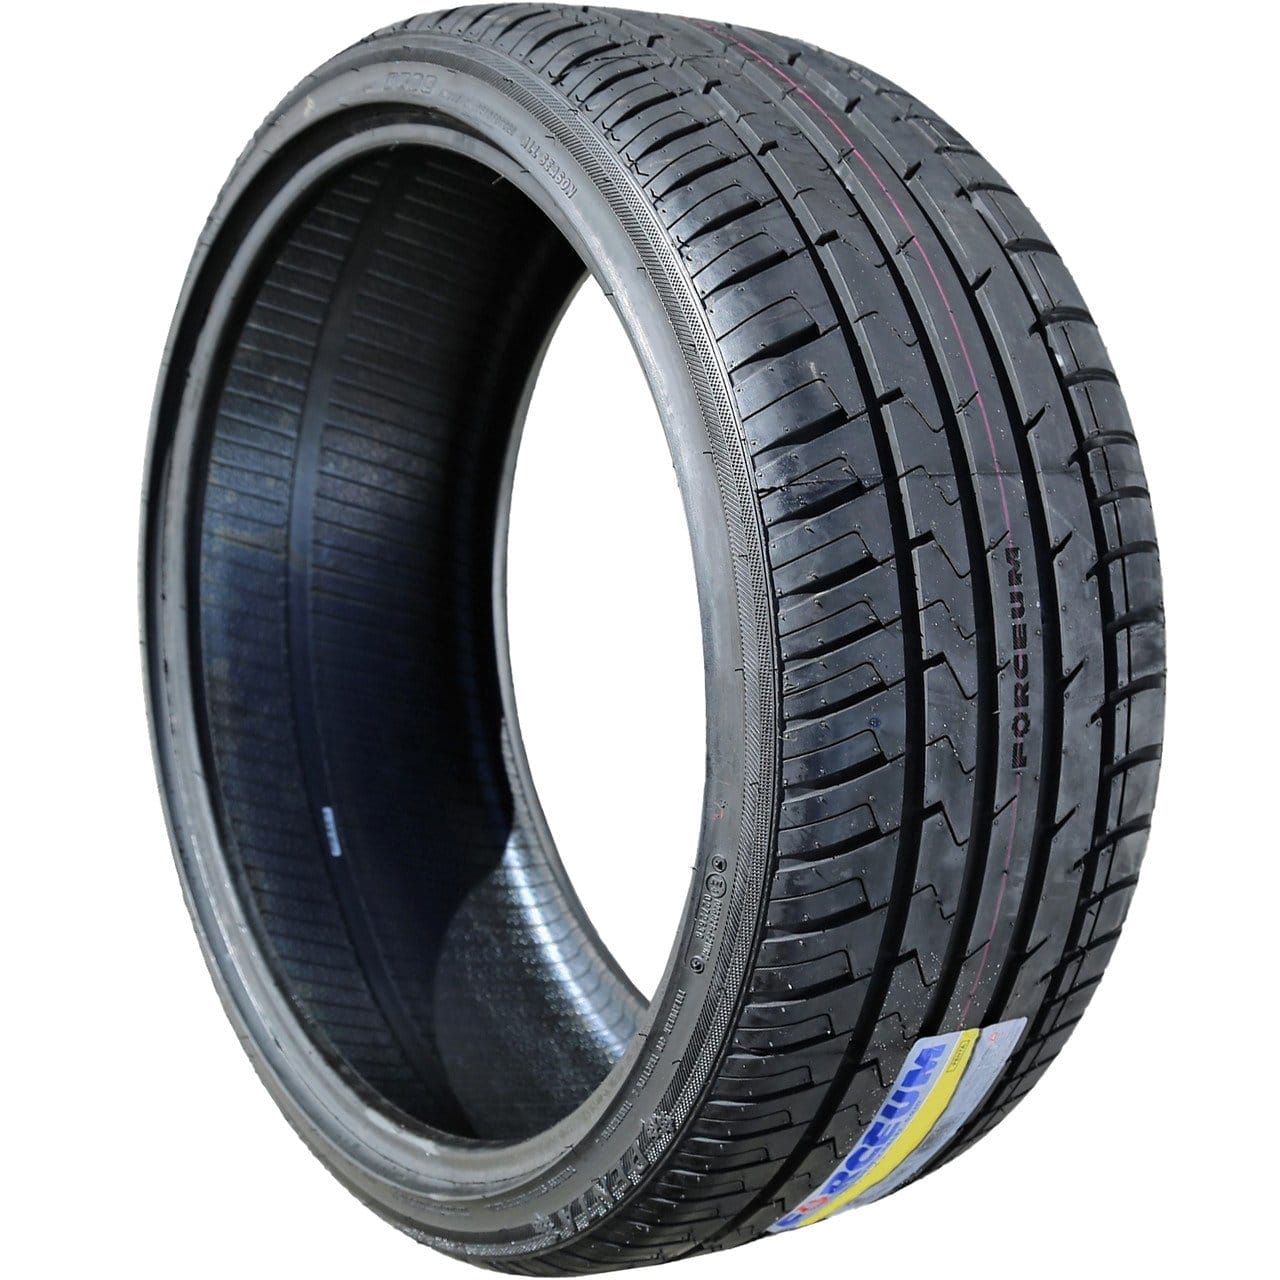 Image of Forceum Penta 275/55R20 117V XL AS A/S All Season Tire